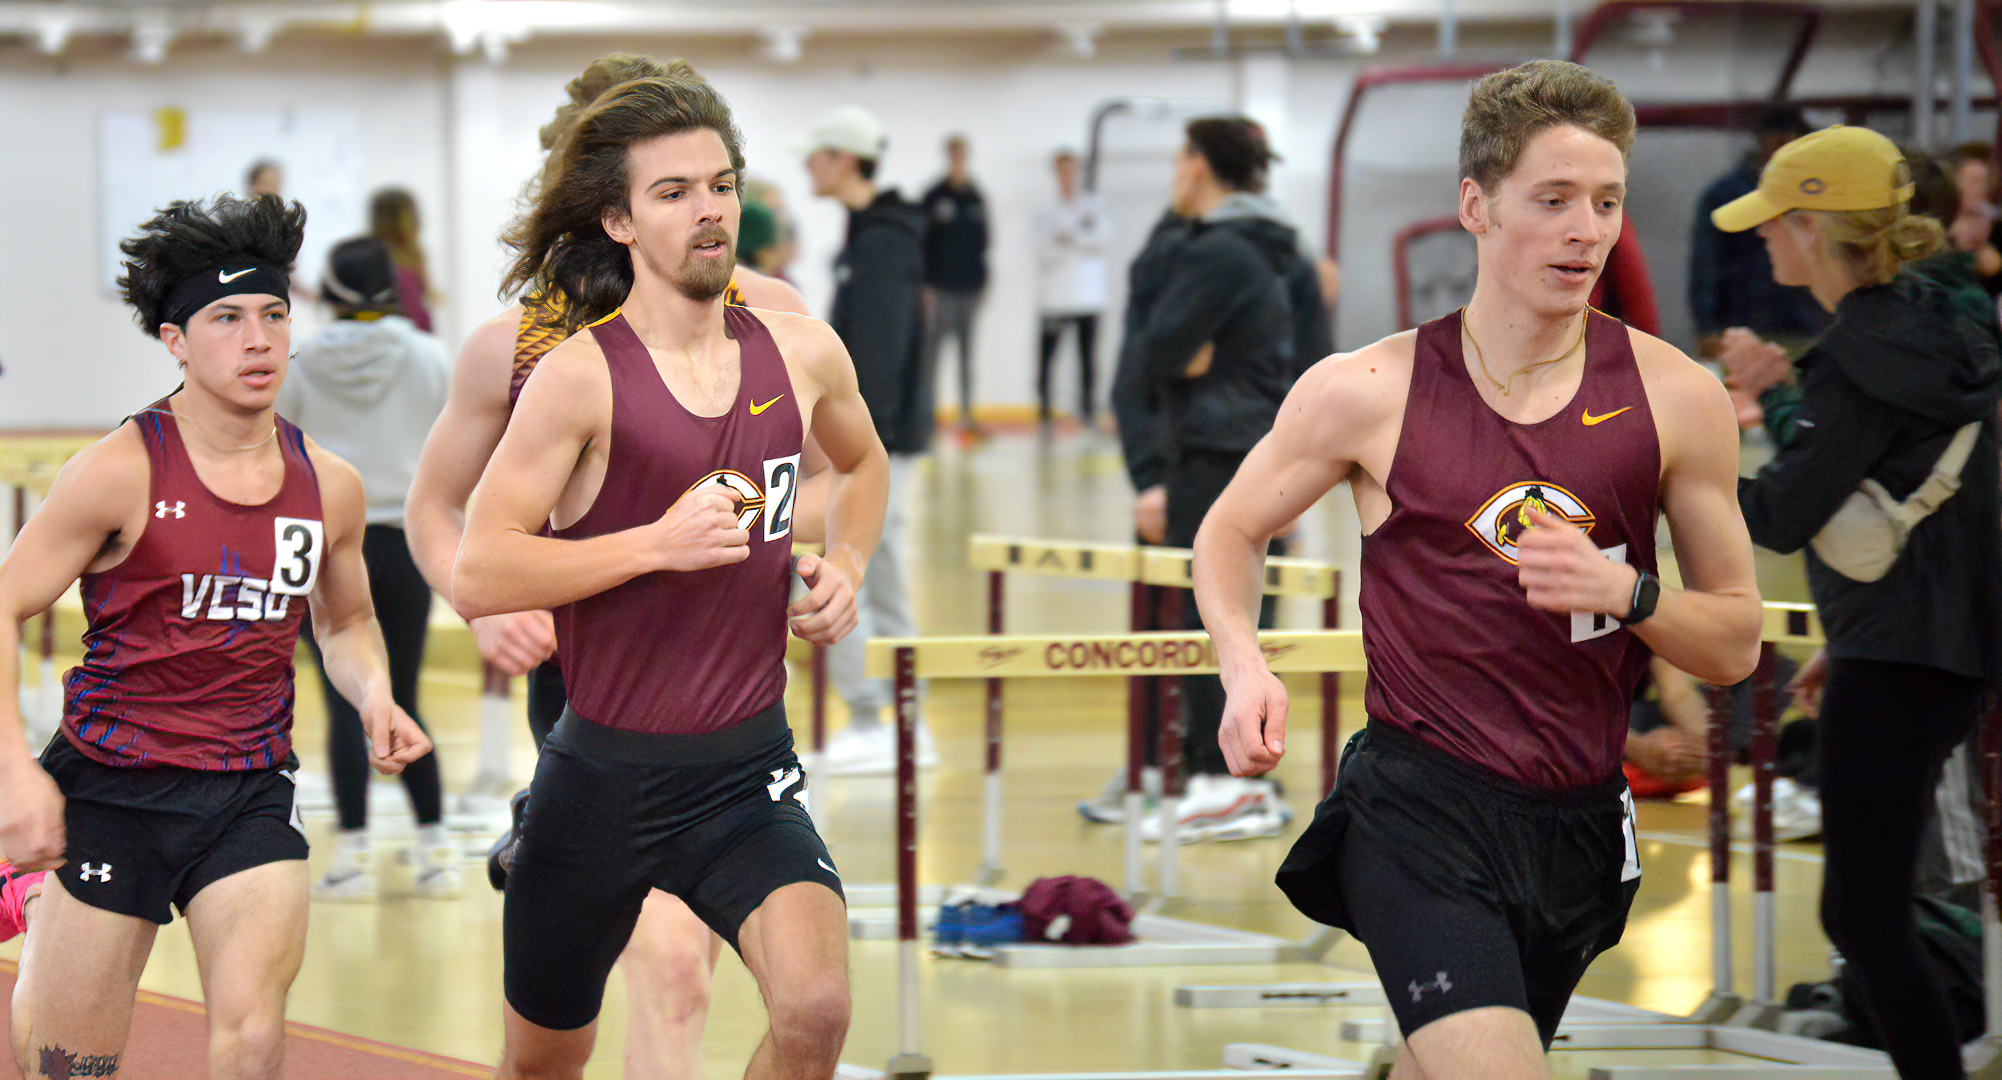 Joe Lee (R) and Tanner Olson (M) take to the lead in the mile during the season-starting Cobber Open. The duo finished 1-2 in the race.